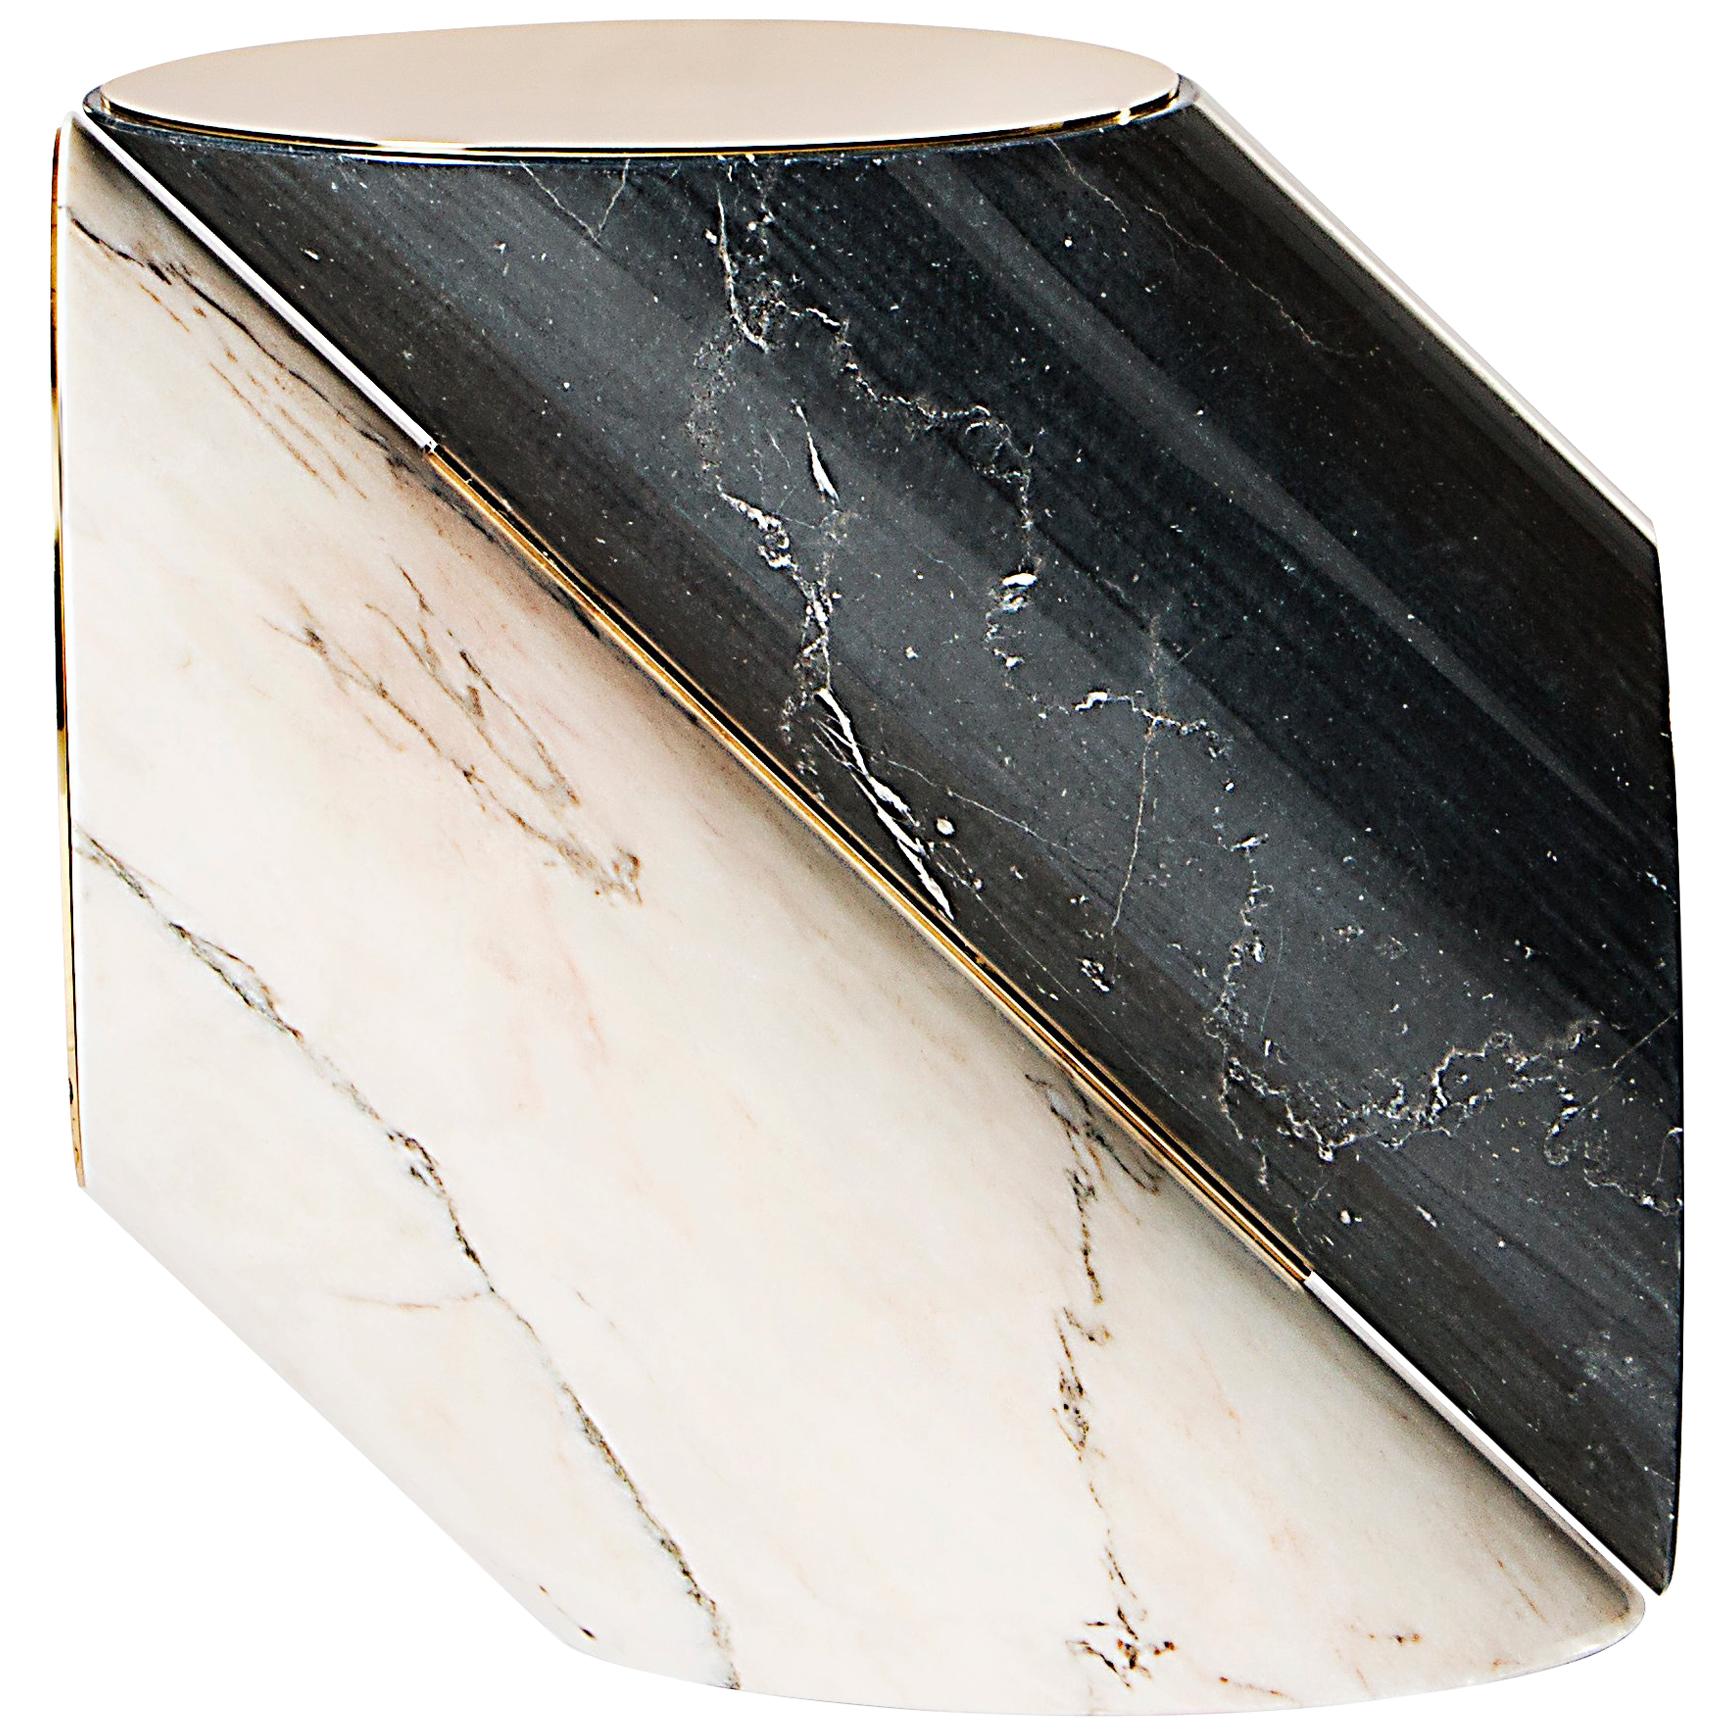 This eccentric side table is almost a geometric impossibility. Jacobsen honors a clean design approach, the same used by Arne himself. Black and white marble set a contrast that challenges the eye with its textures. The inside is visibly hollow and